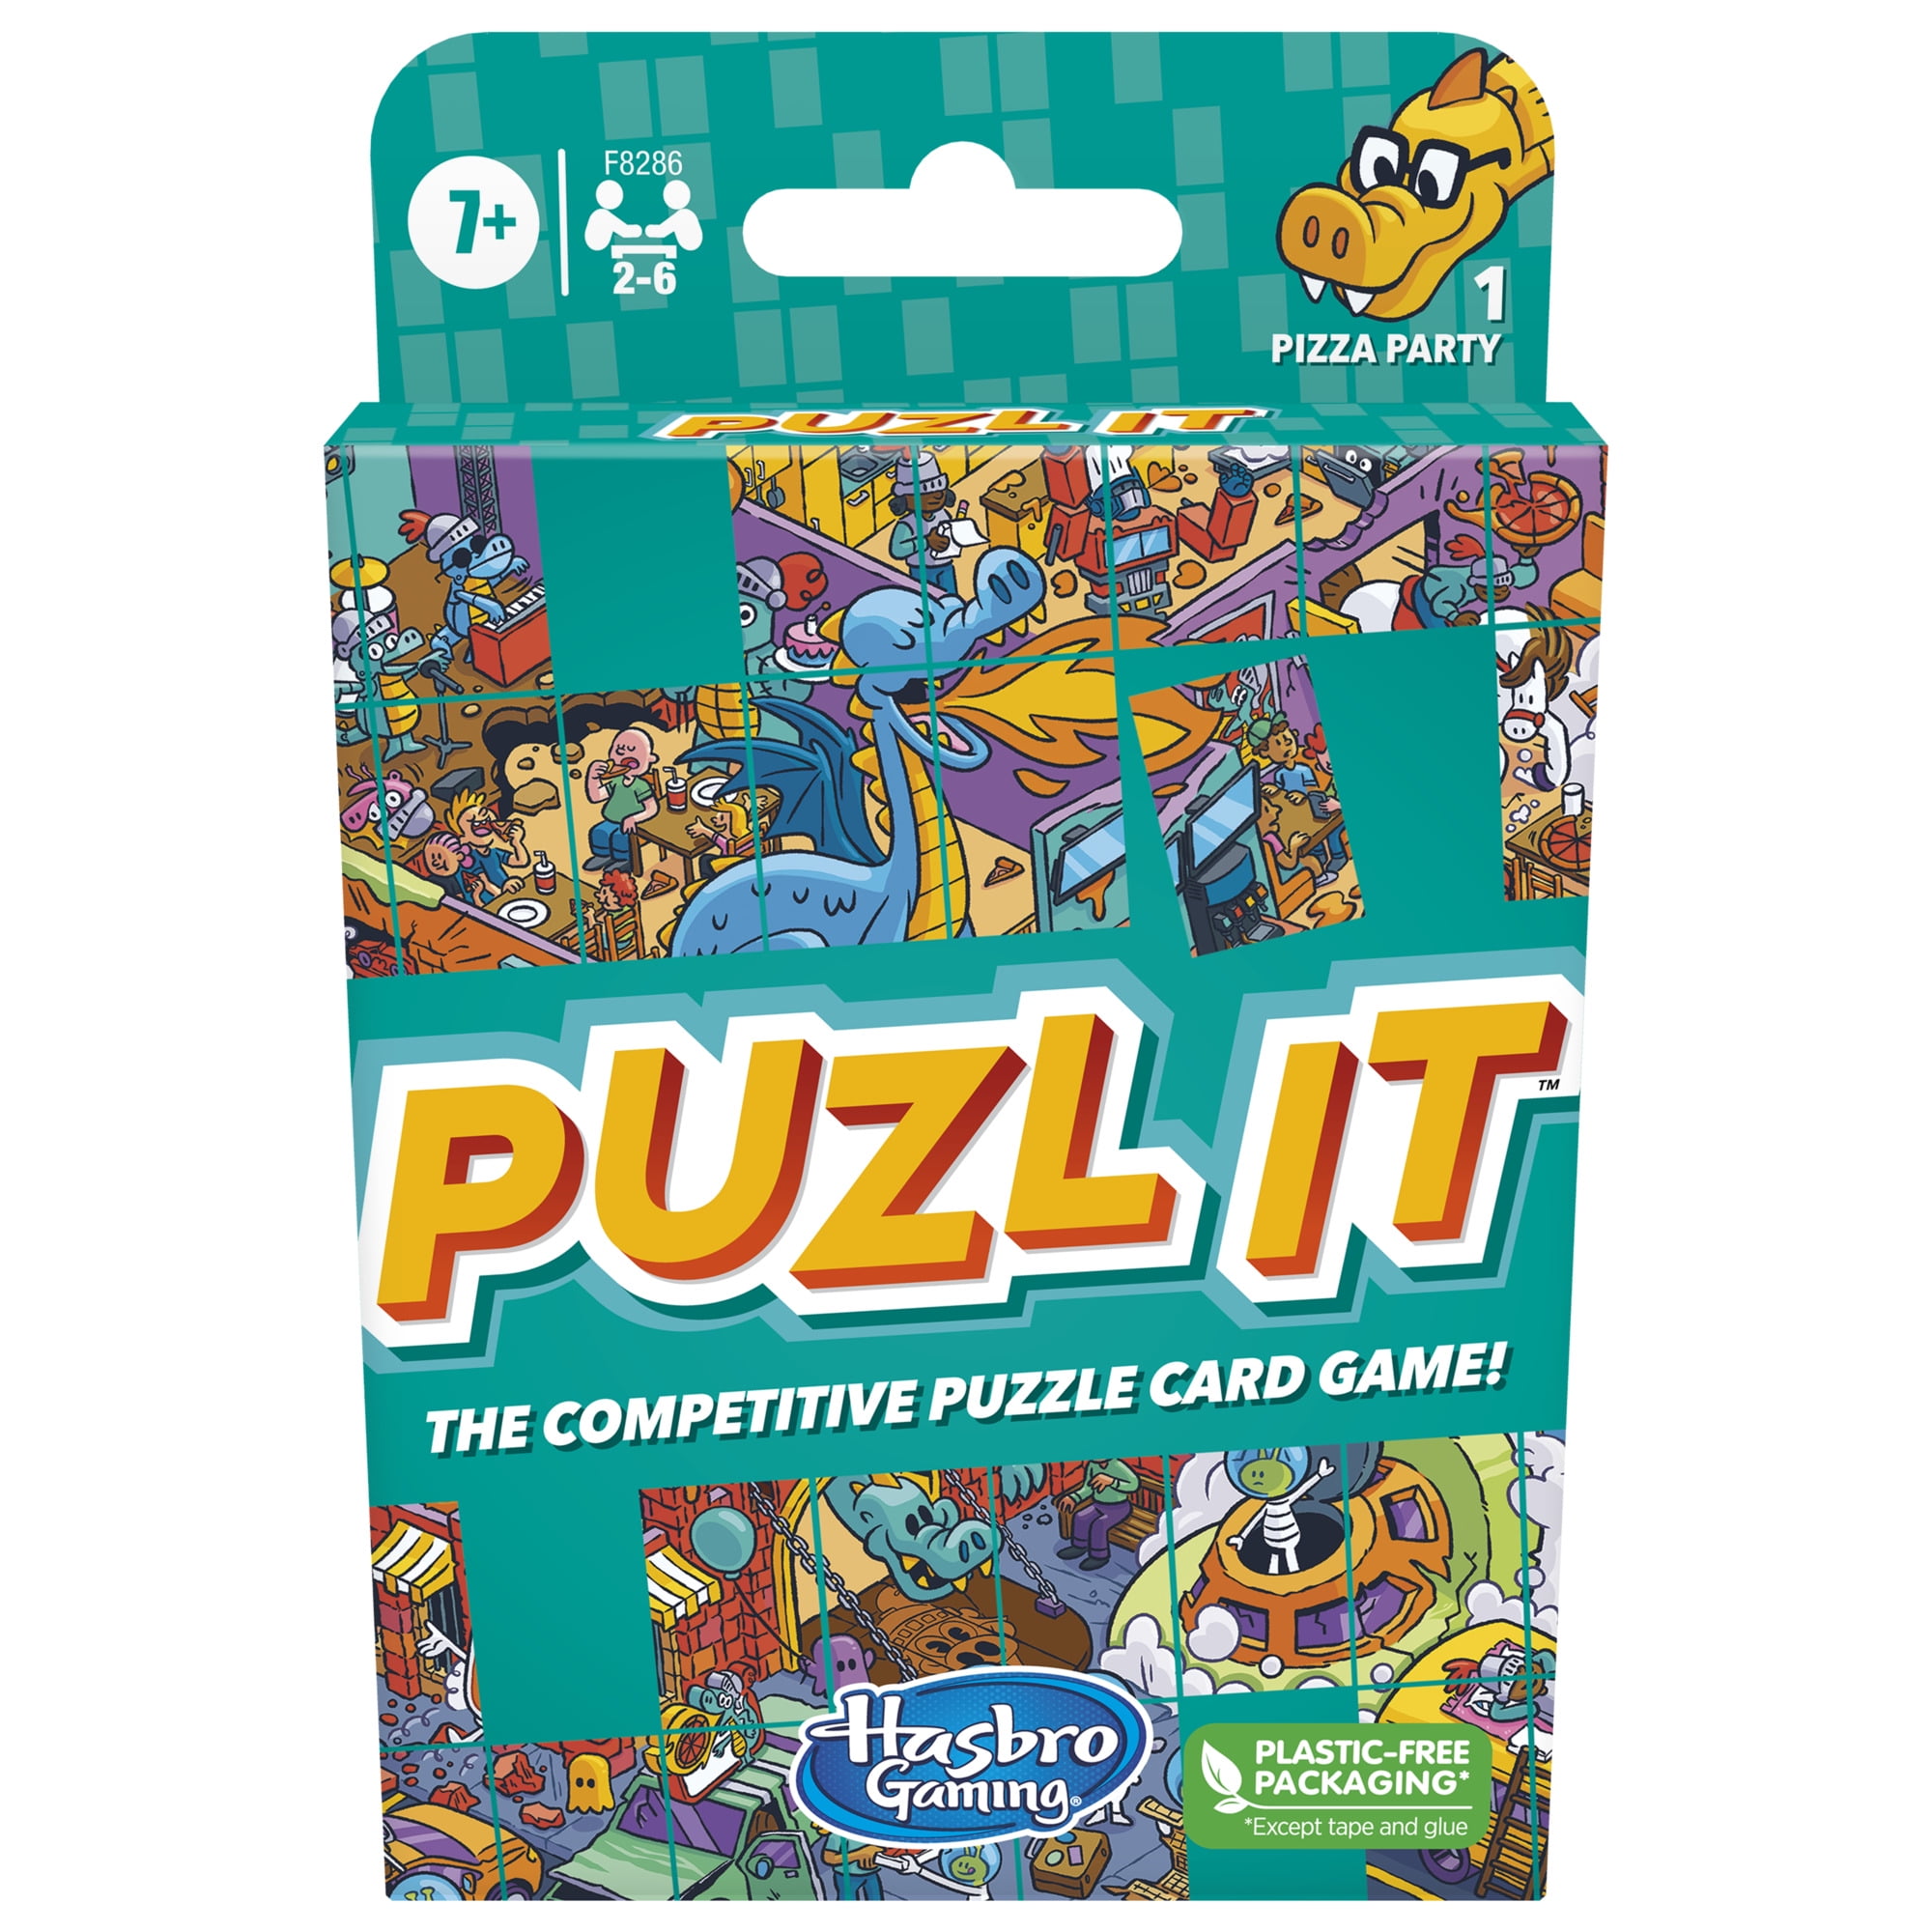 Puzl It Game, Competitive Puzzle Card Game for Ages 7+, Pizza Party Theme